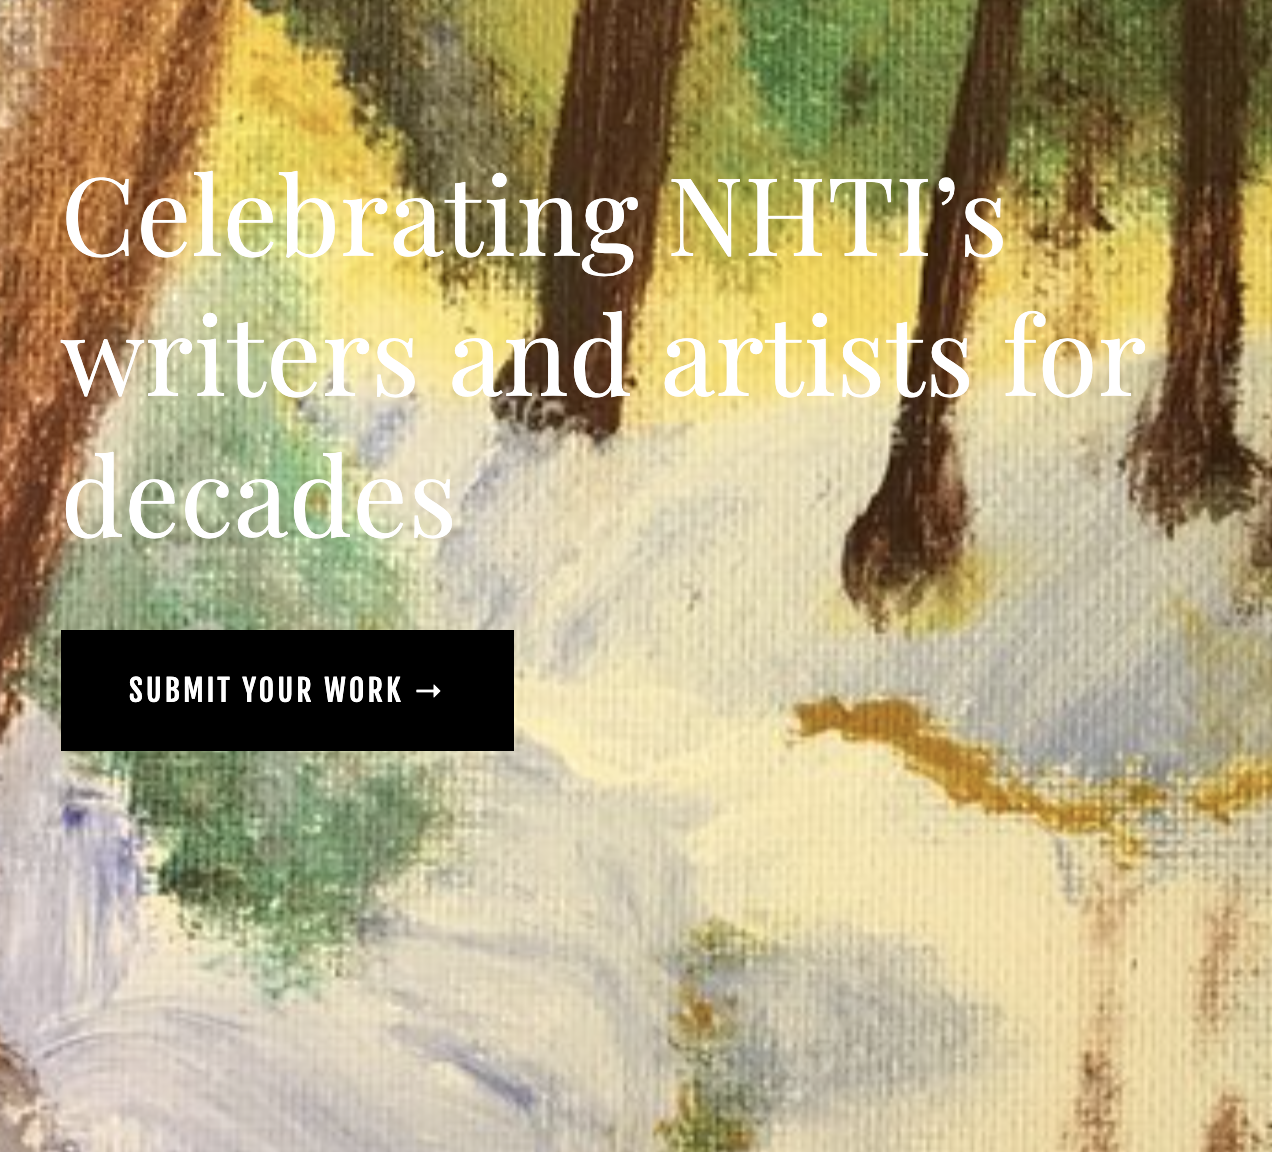 A close of up of a painting with the phrase: celebrating NHTI's writings and artist for decades